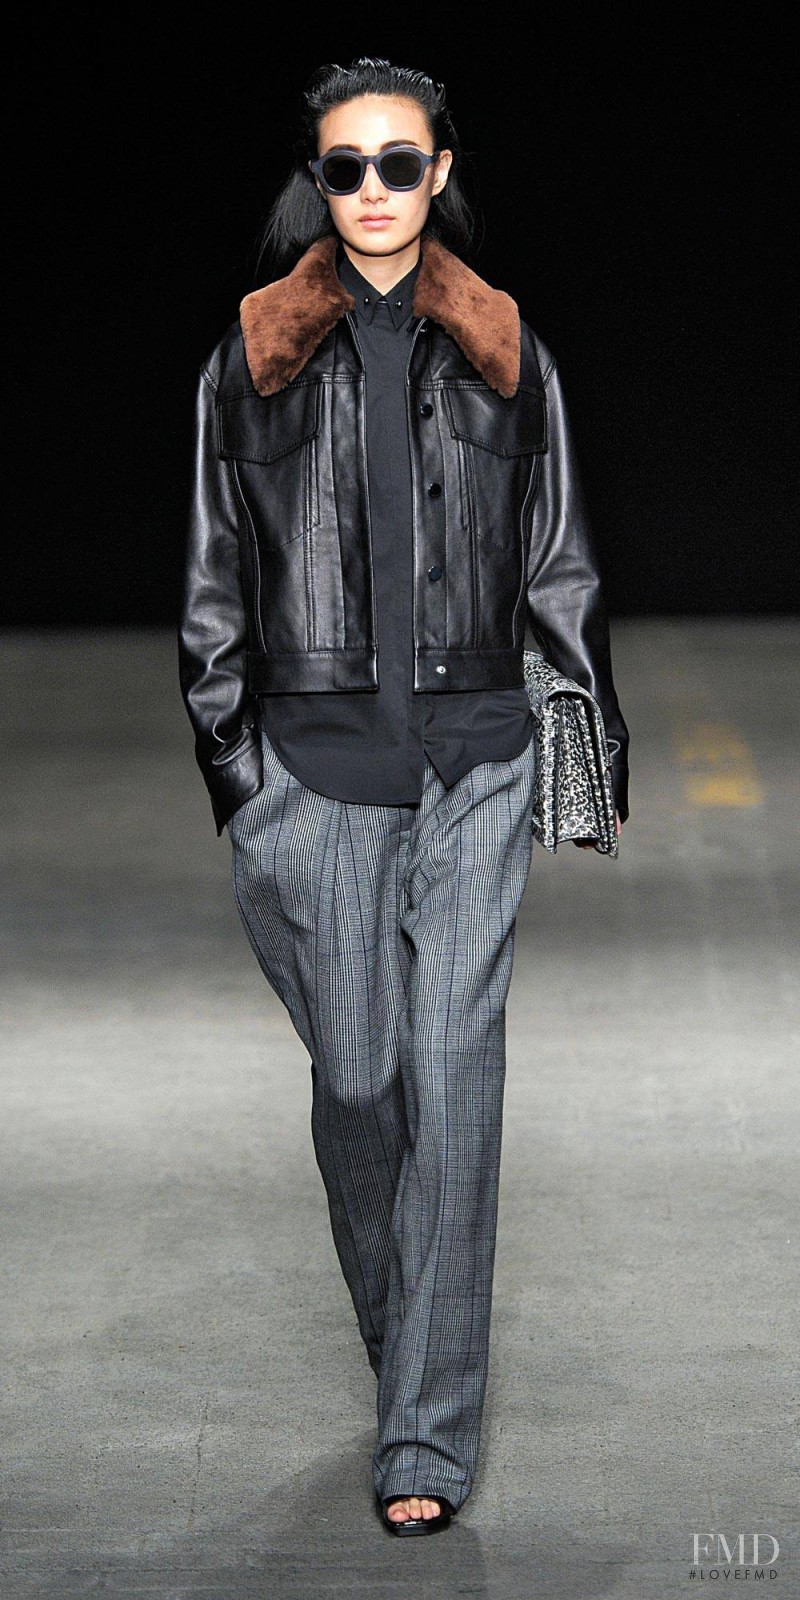 Shu Pei featured in  the 3.1 Phillip Lim fashion show for Autumn/Winter 2014